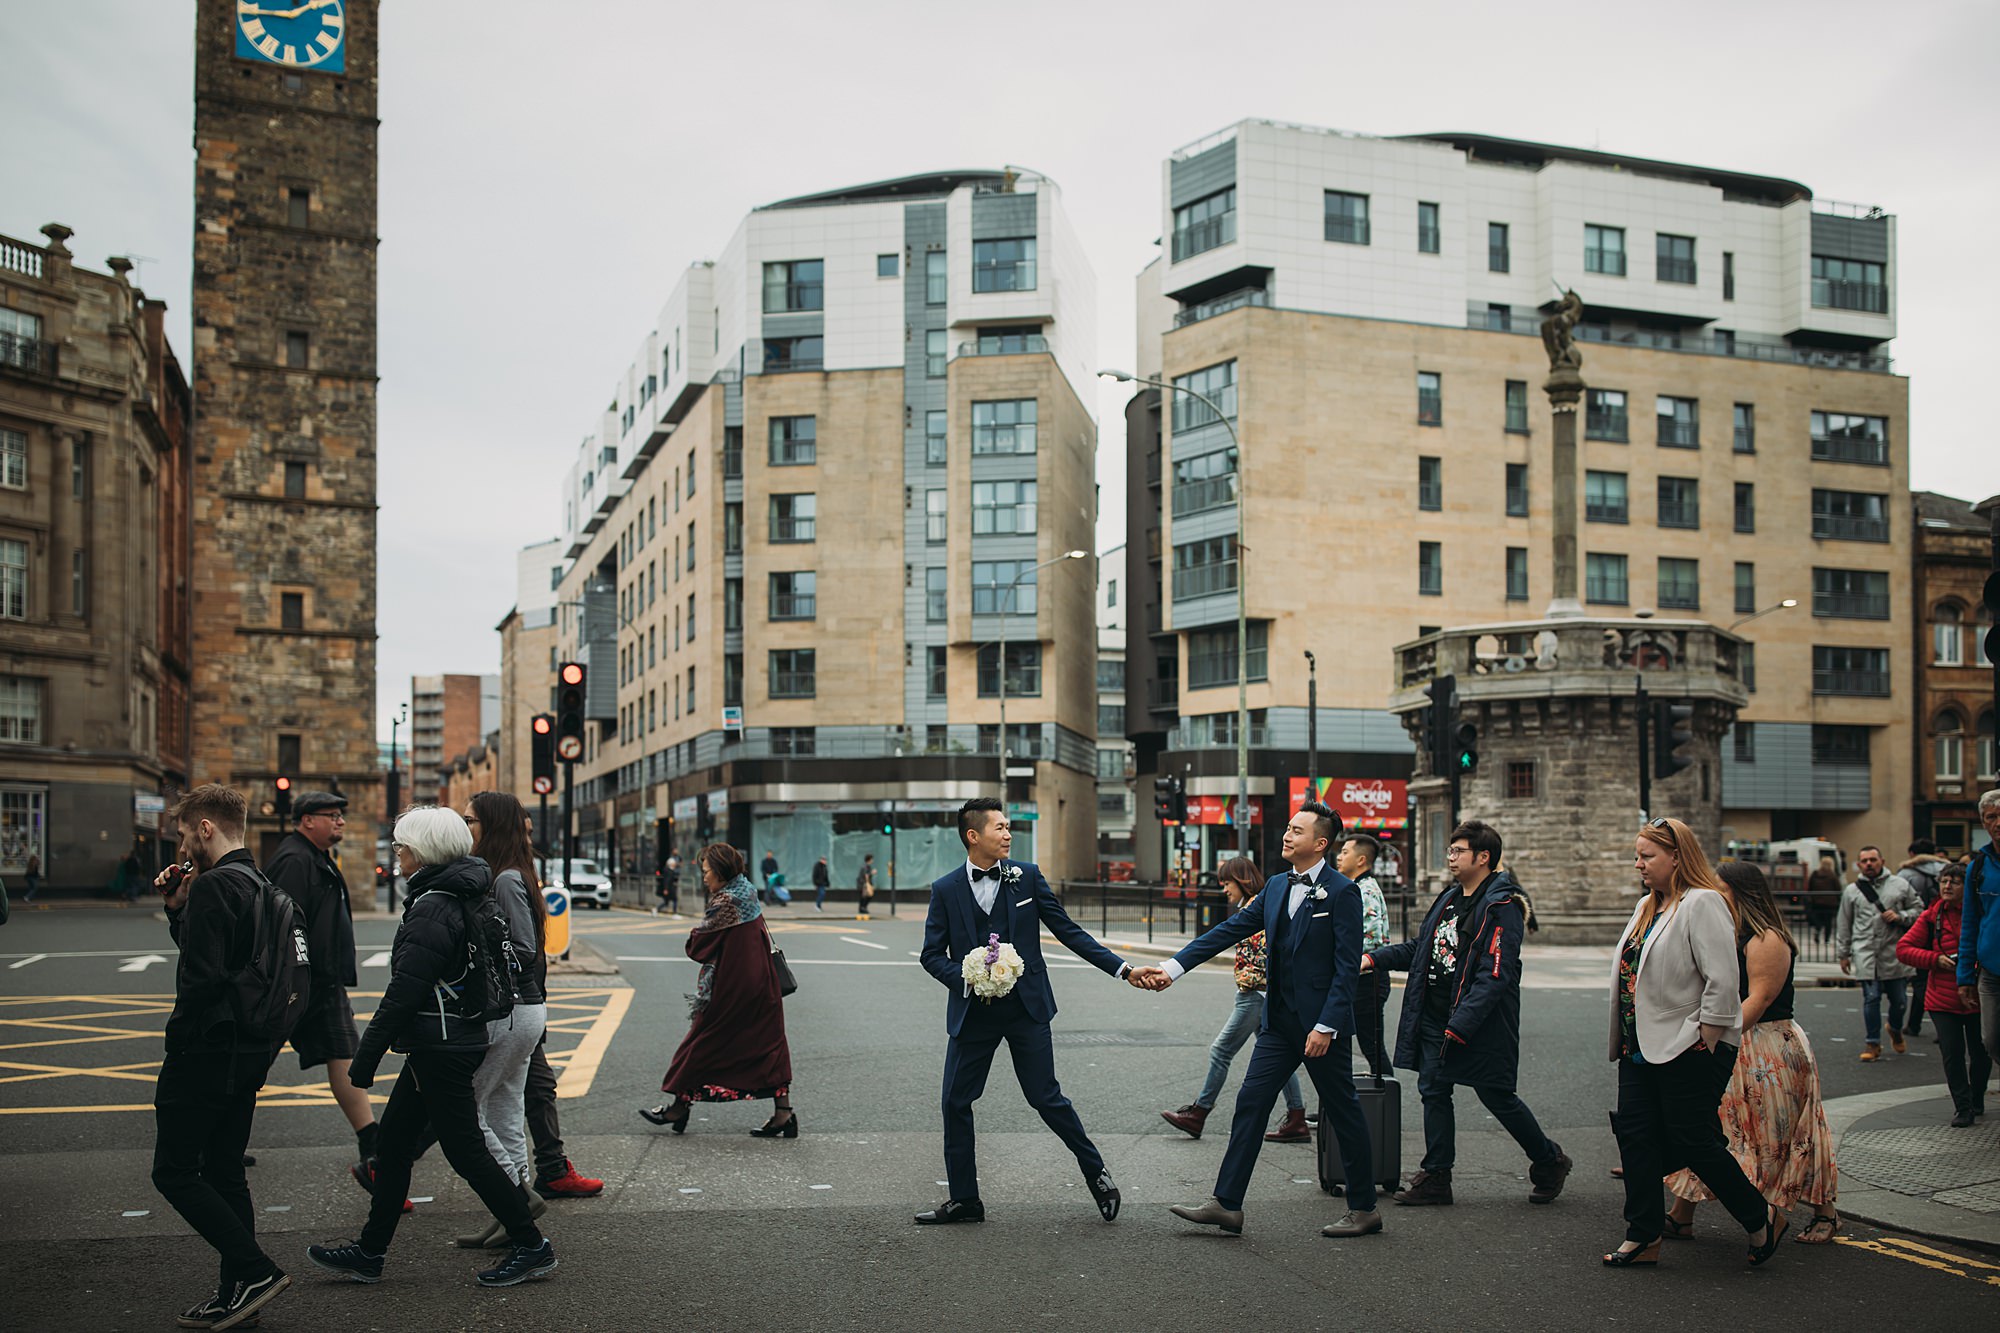 Two grooms walk amongst the crowds during their Glasgow elopement.